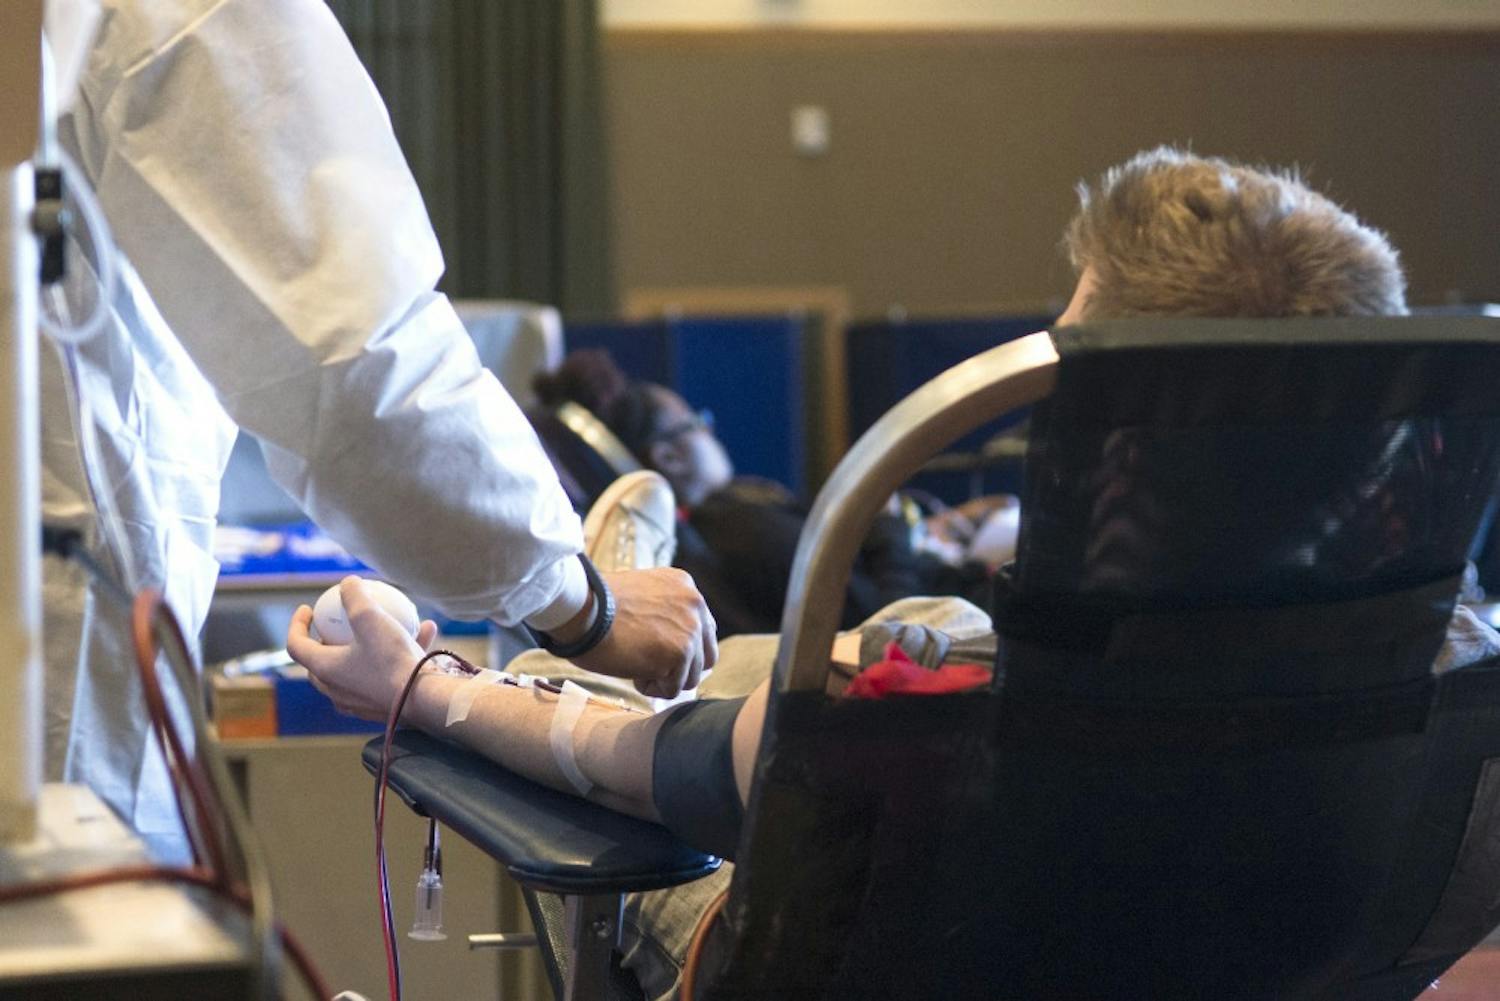 Ben Studer, a senior in Family Studies, donates blood for the Battle I-25 Blood Drive vs NMSU at the SUB Ballroom on Monday. The blood drive event is in its second year and runs through this week inside the SUB and at bloodmobiles around campus. 